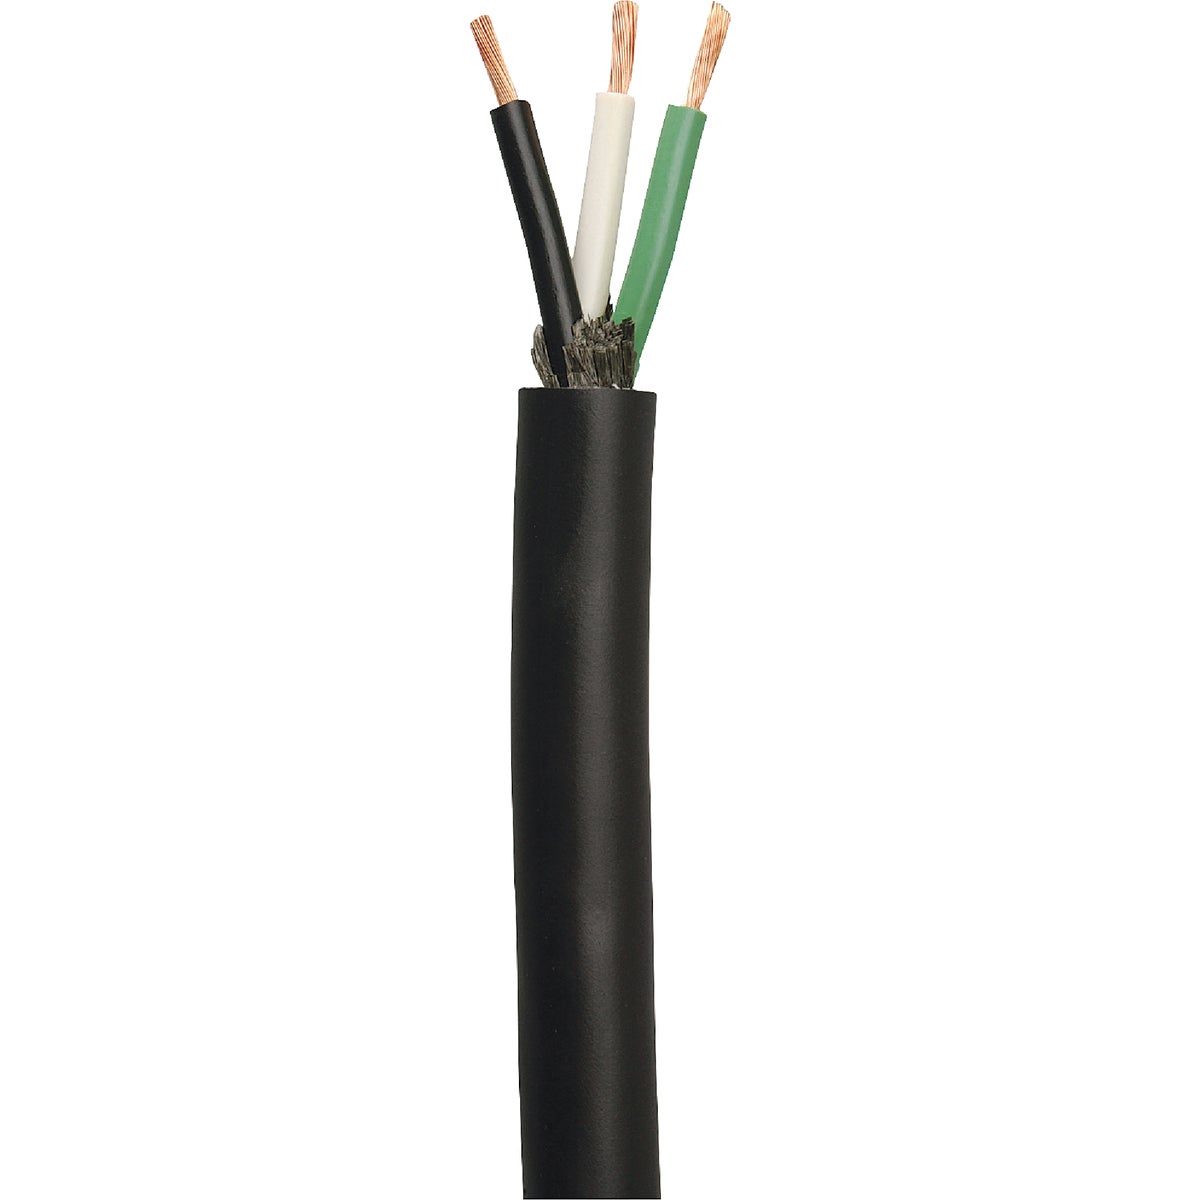 Hard Service Cord Electrical Wire